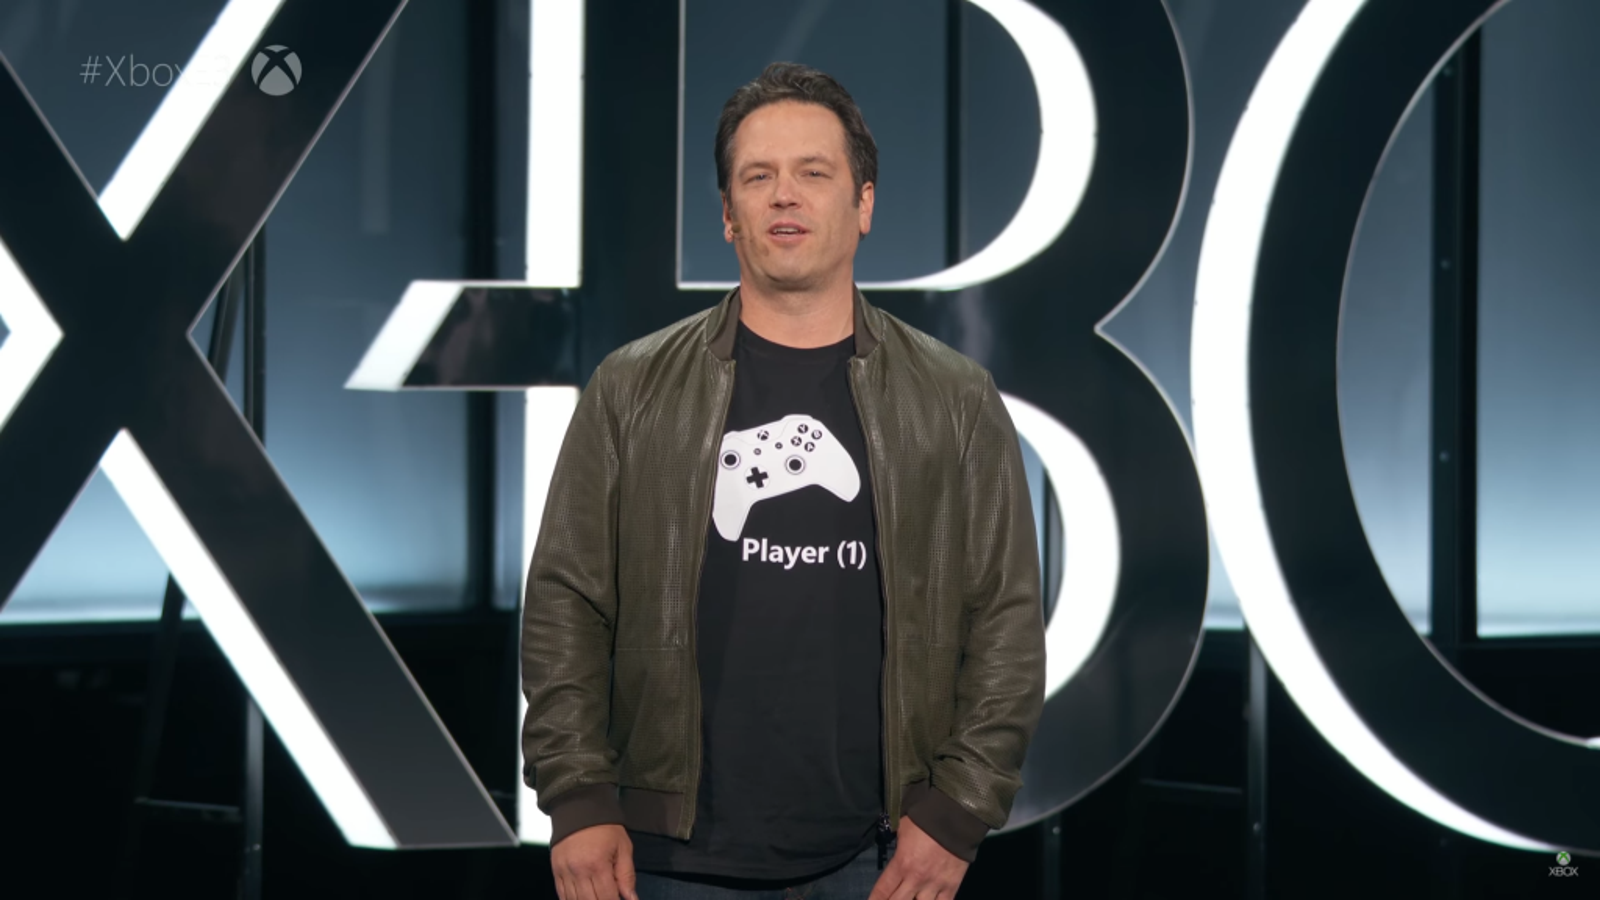 Xbox Boss Says Gaming Business Will Become Untenable If This Doesn